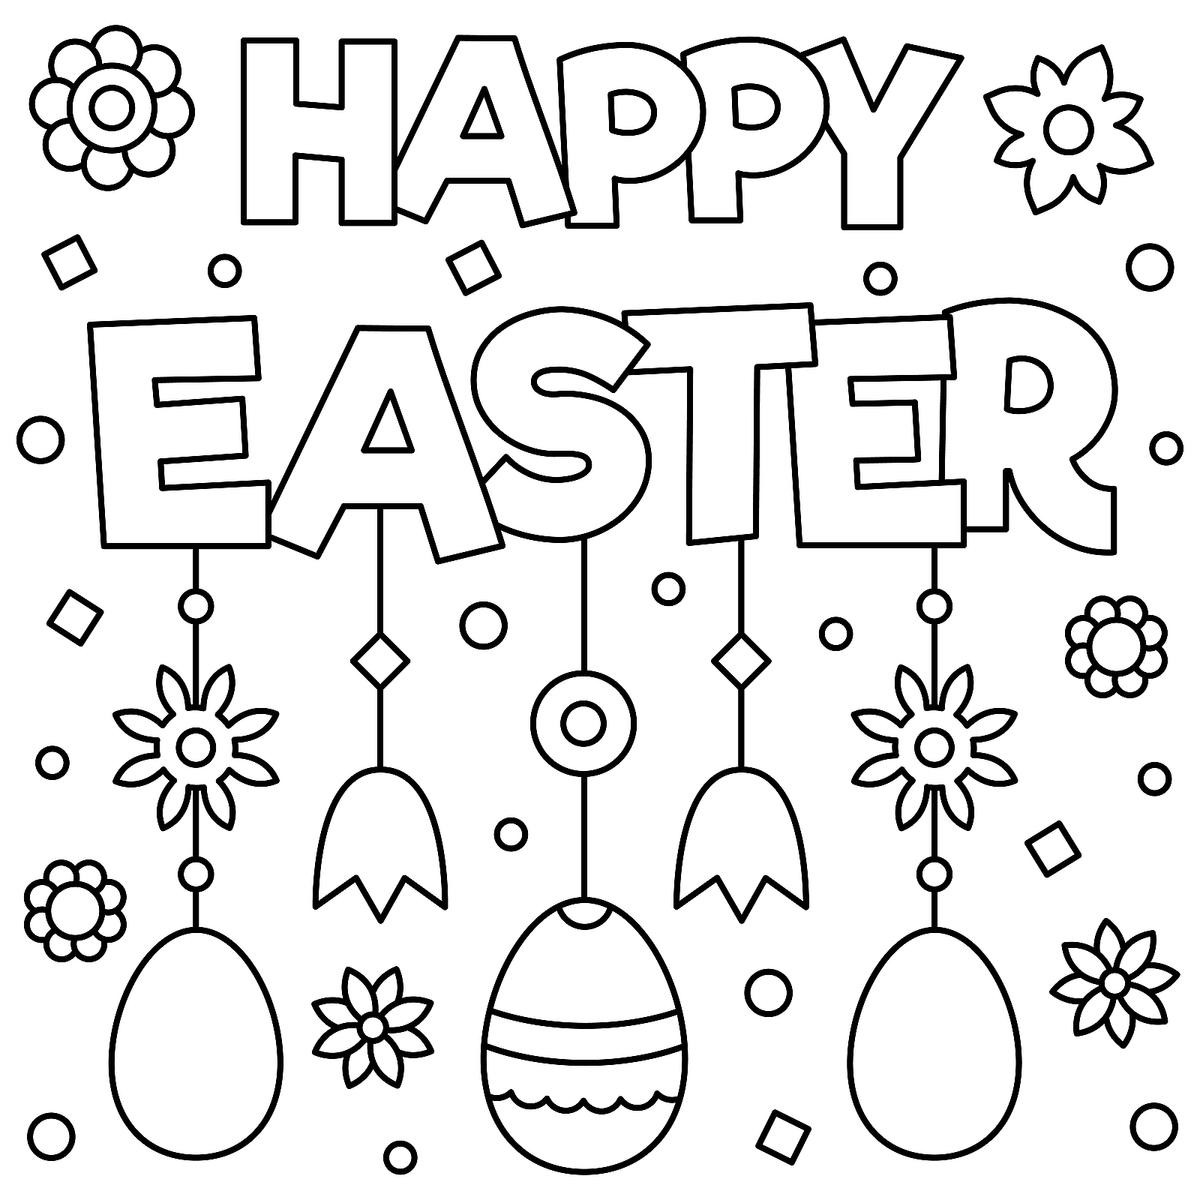 Happy Easter Coloring Pages Free Printable
 Easter Coloring Pages Fun Spring Themed Printables for